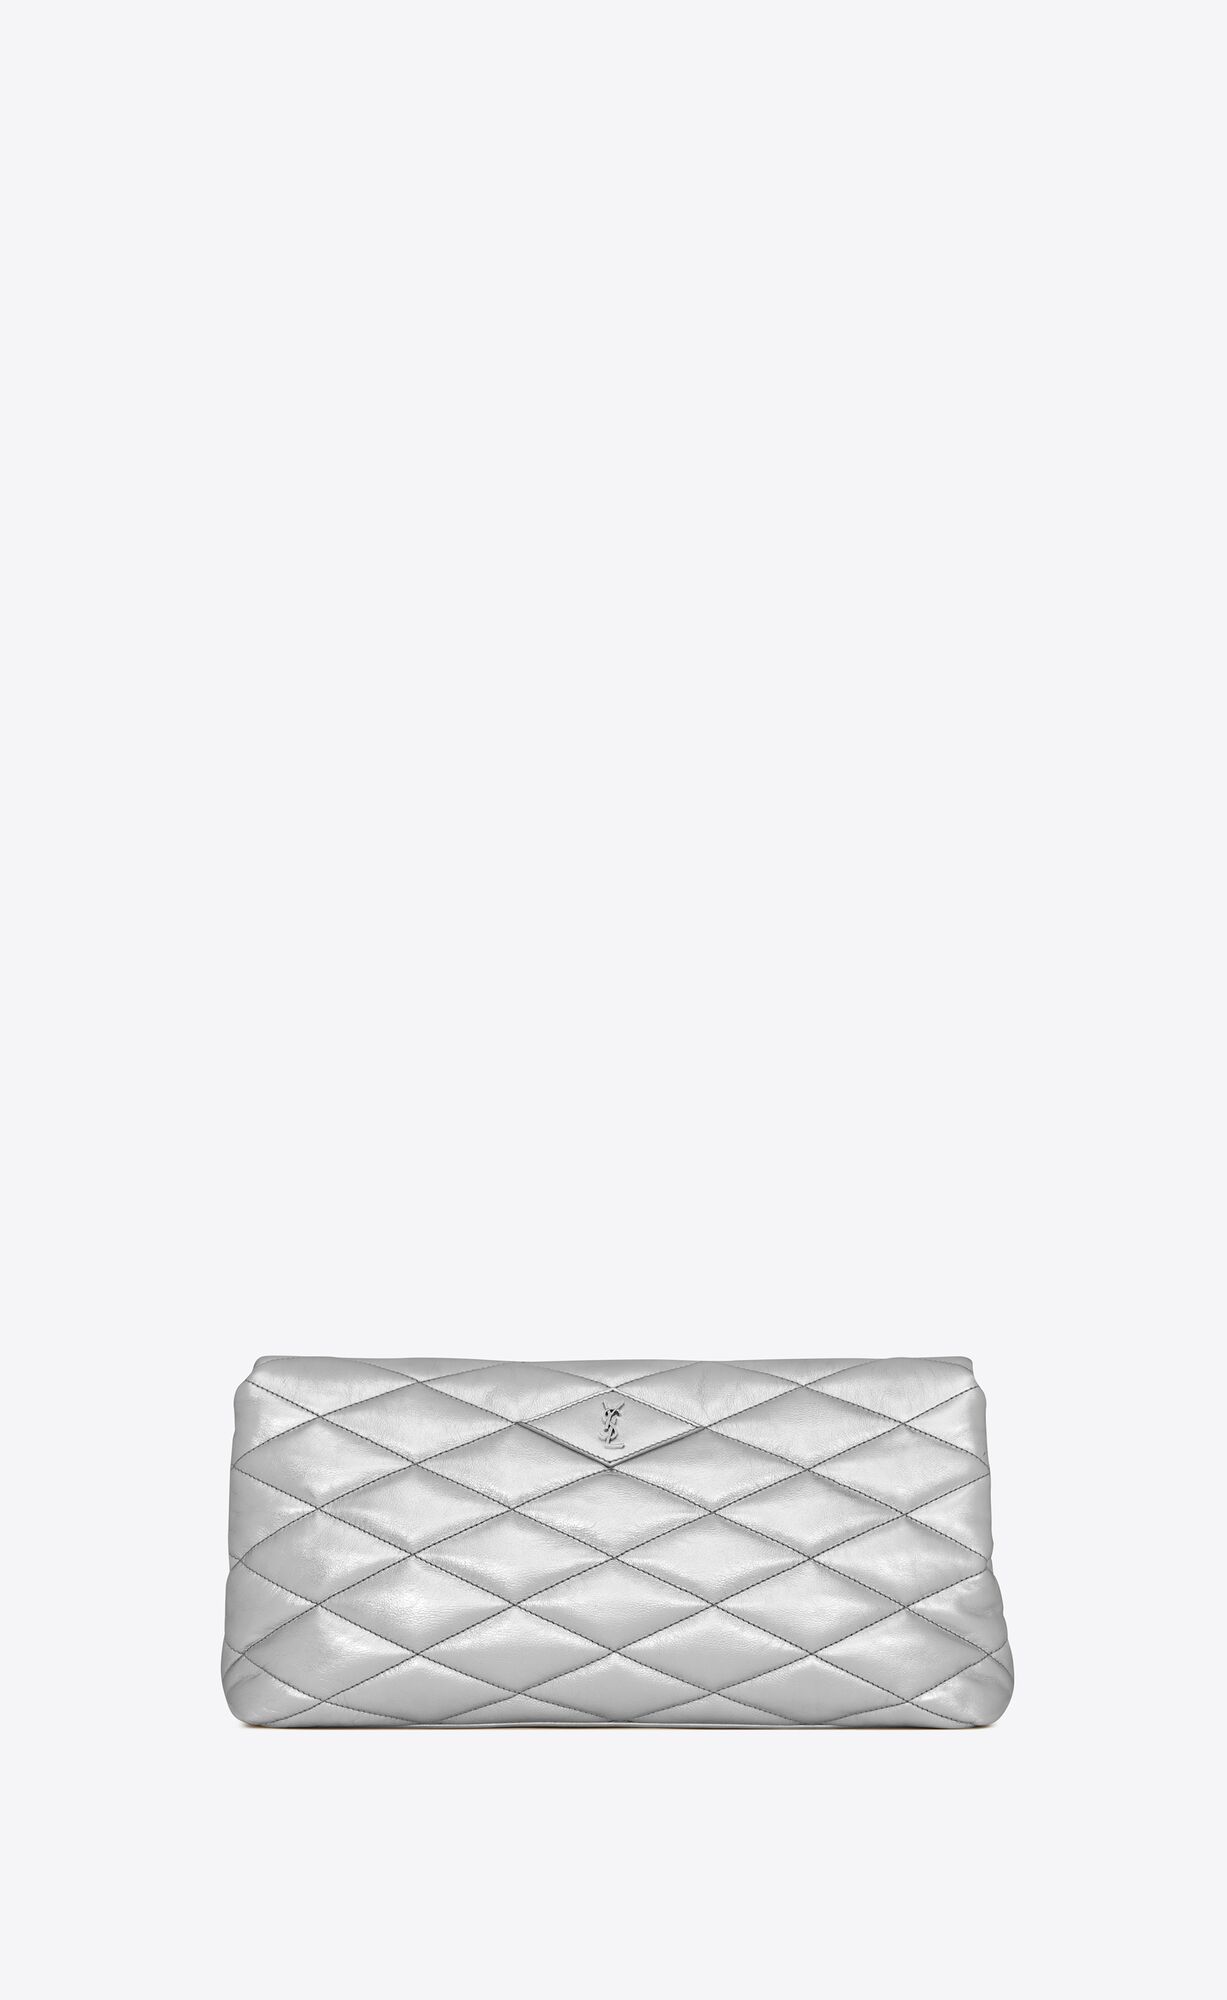 Saint Laurent Sade Puffer Envelope Clutch In Crinkled Lamé Leather – Silver – 655004AAAD38106